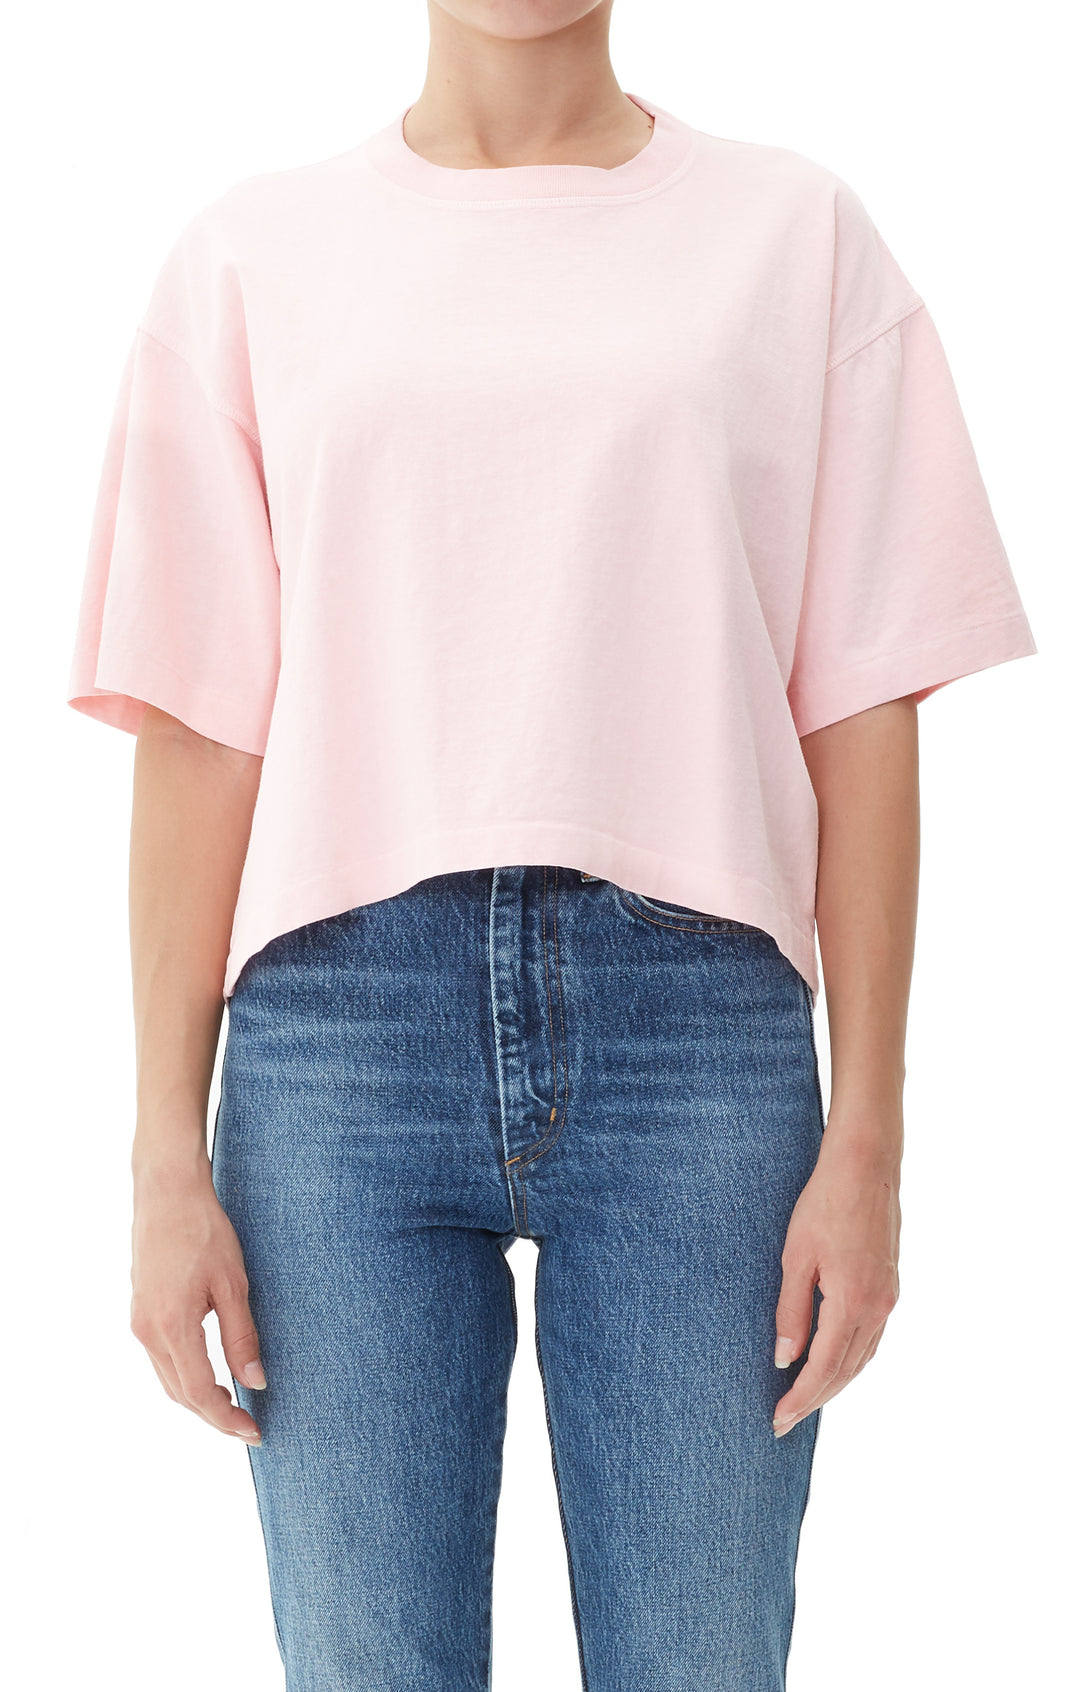 AGOLDE - Boxy Tee Rose Pink